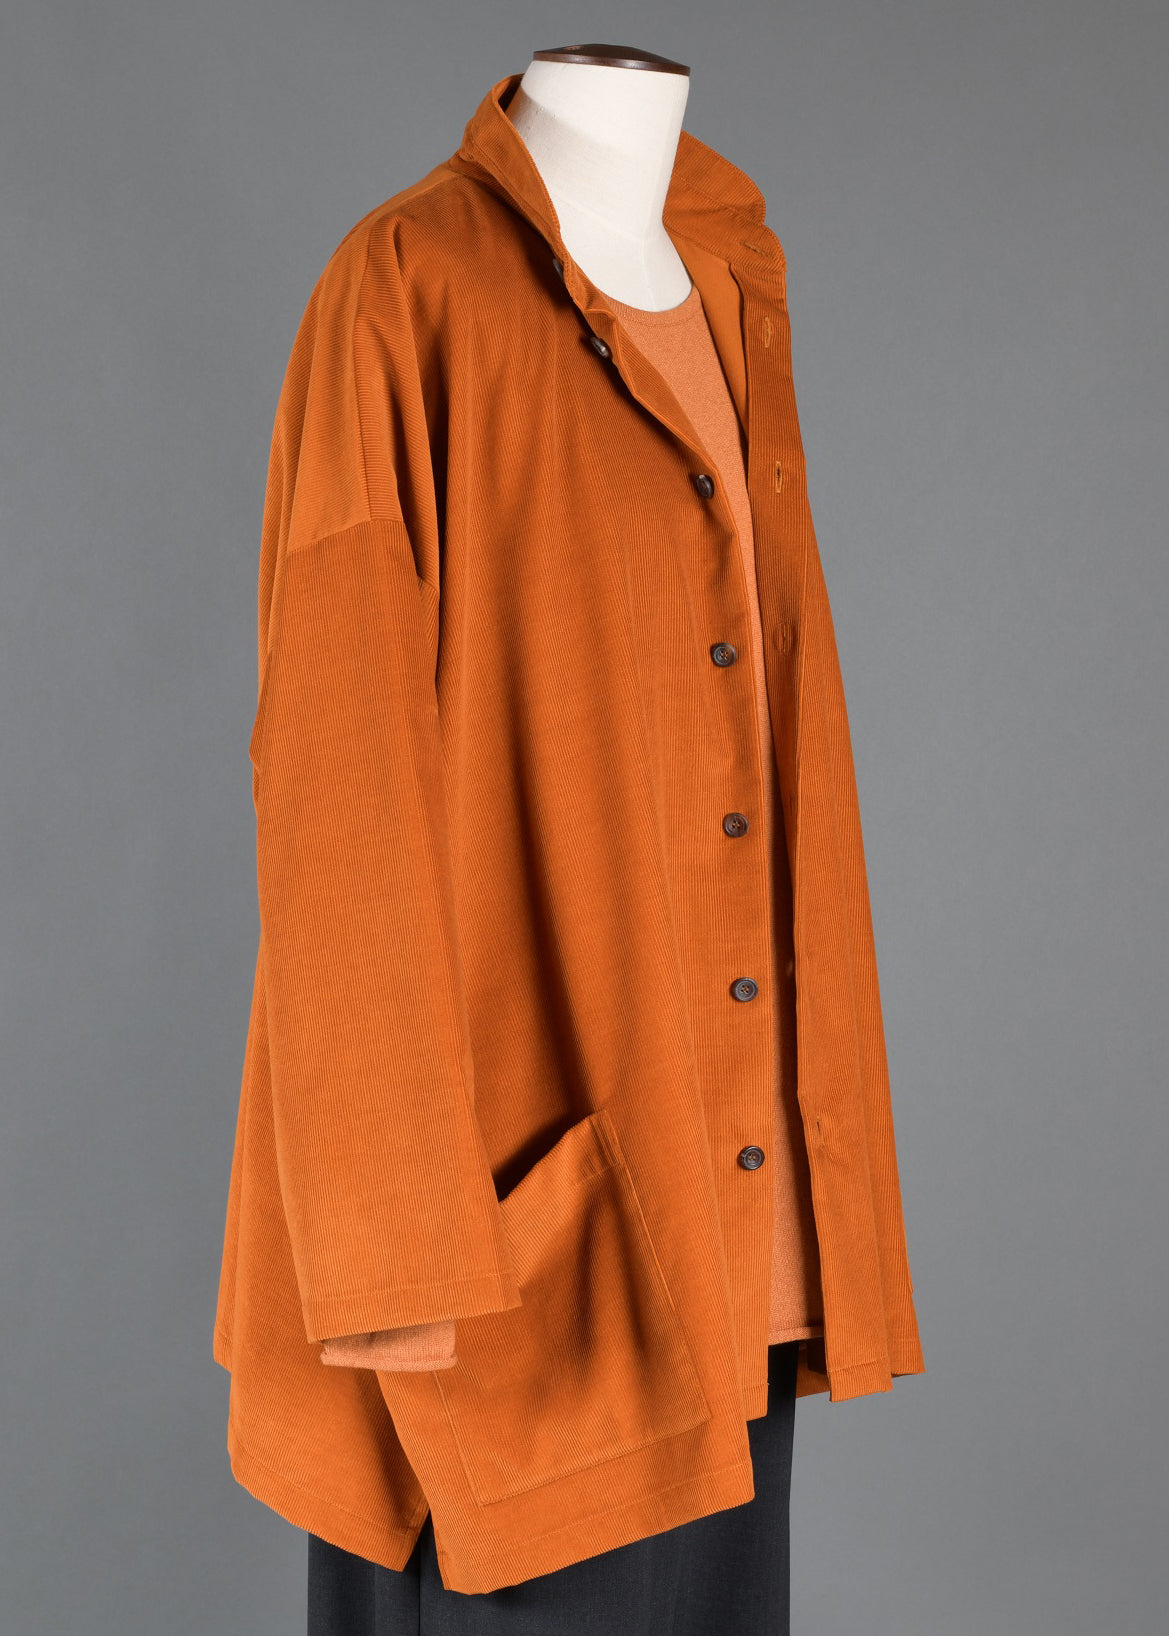 wide a-line back pleat jacket with double stand collar - long